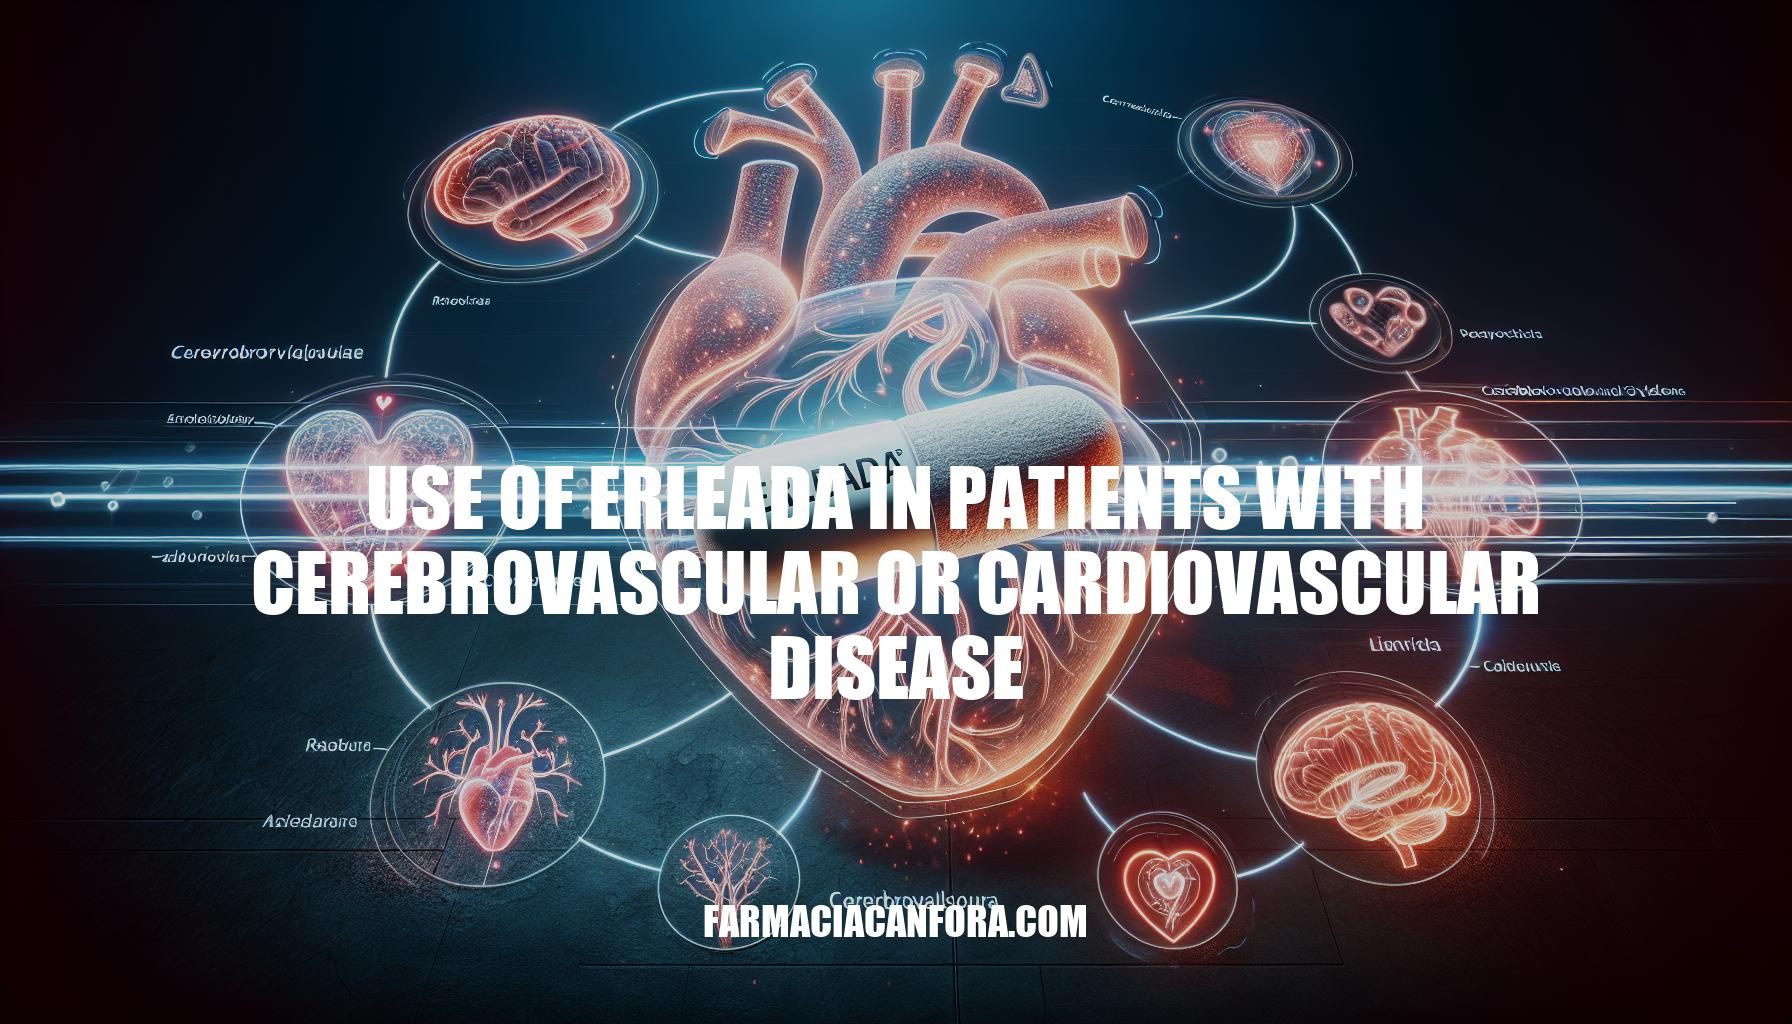 The Use of Erleada in Patients with Cerebrovascular or Cardiovascular Disease